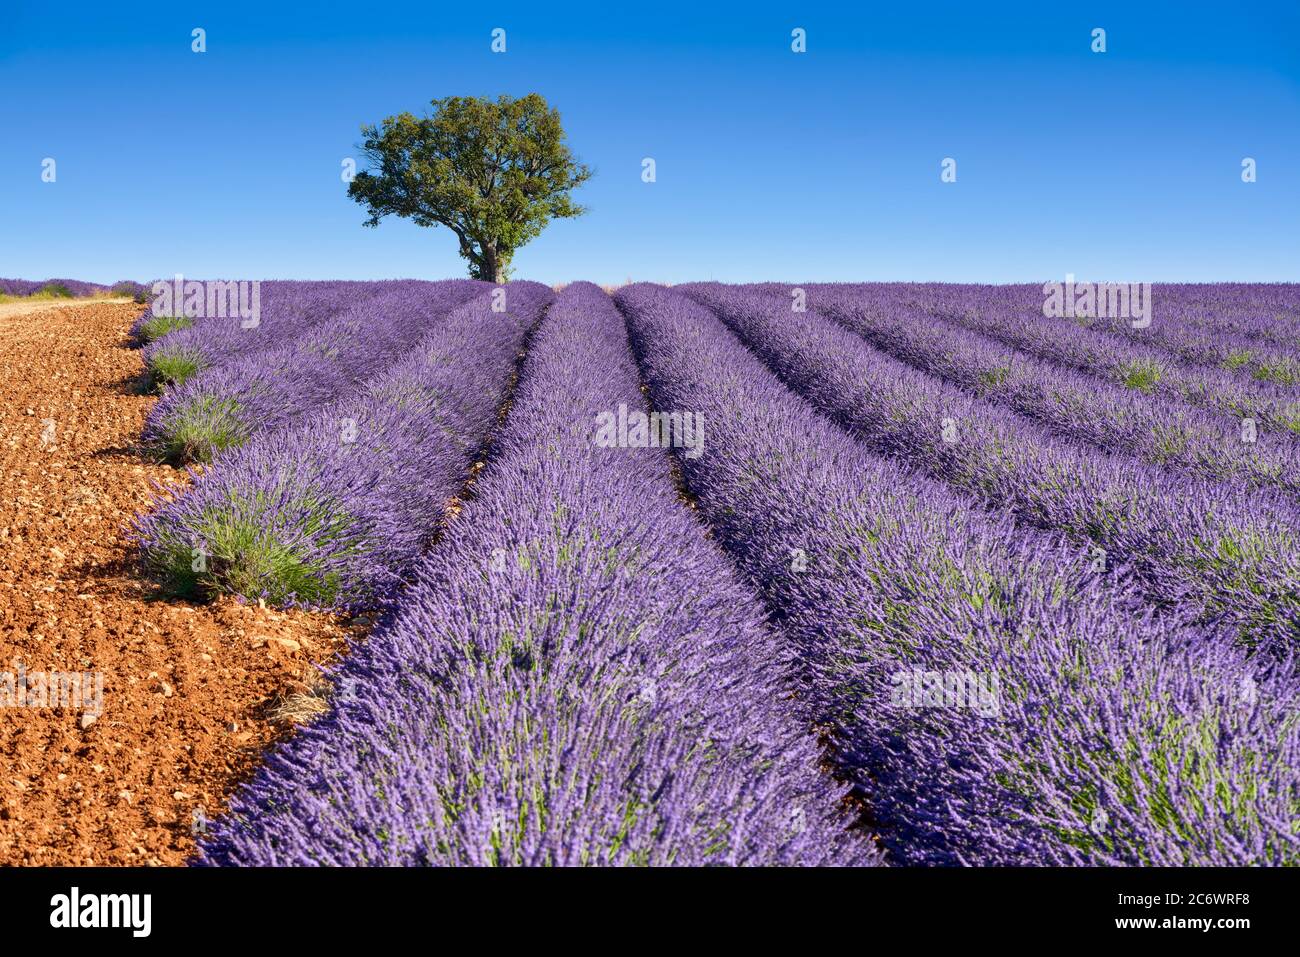 Lavender fields of Provence in summer with almong tree. Valensole Plateau, Alpes-de-Haute-Provence, European Alps, France Stock Photo